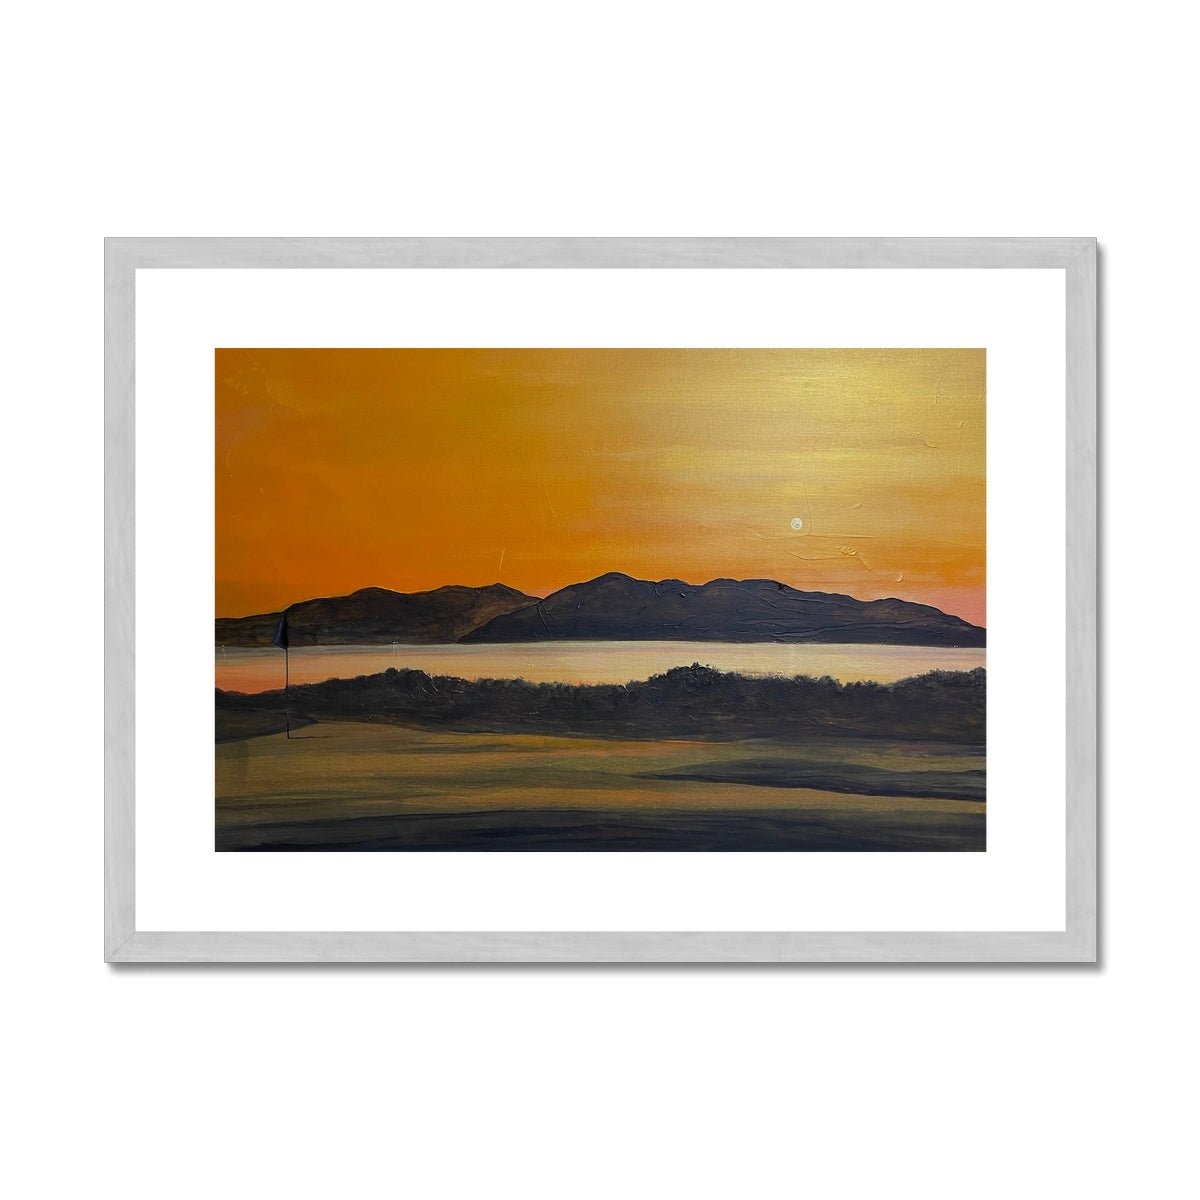 Arran & The 5th Green Royal Troon Golf Course Painting | Antique Framed & Mounted Prints From Scotland-Antique Framed & Mounted Prints-Arran Art Gallery-A2 Landscape-Silver Frame-Paintings, Prints, Homeware, Art Gifts From Scotland By Scottish Artist Kevin Hunter